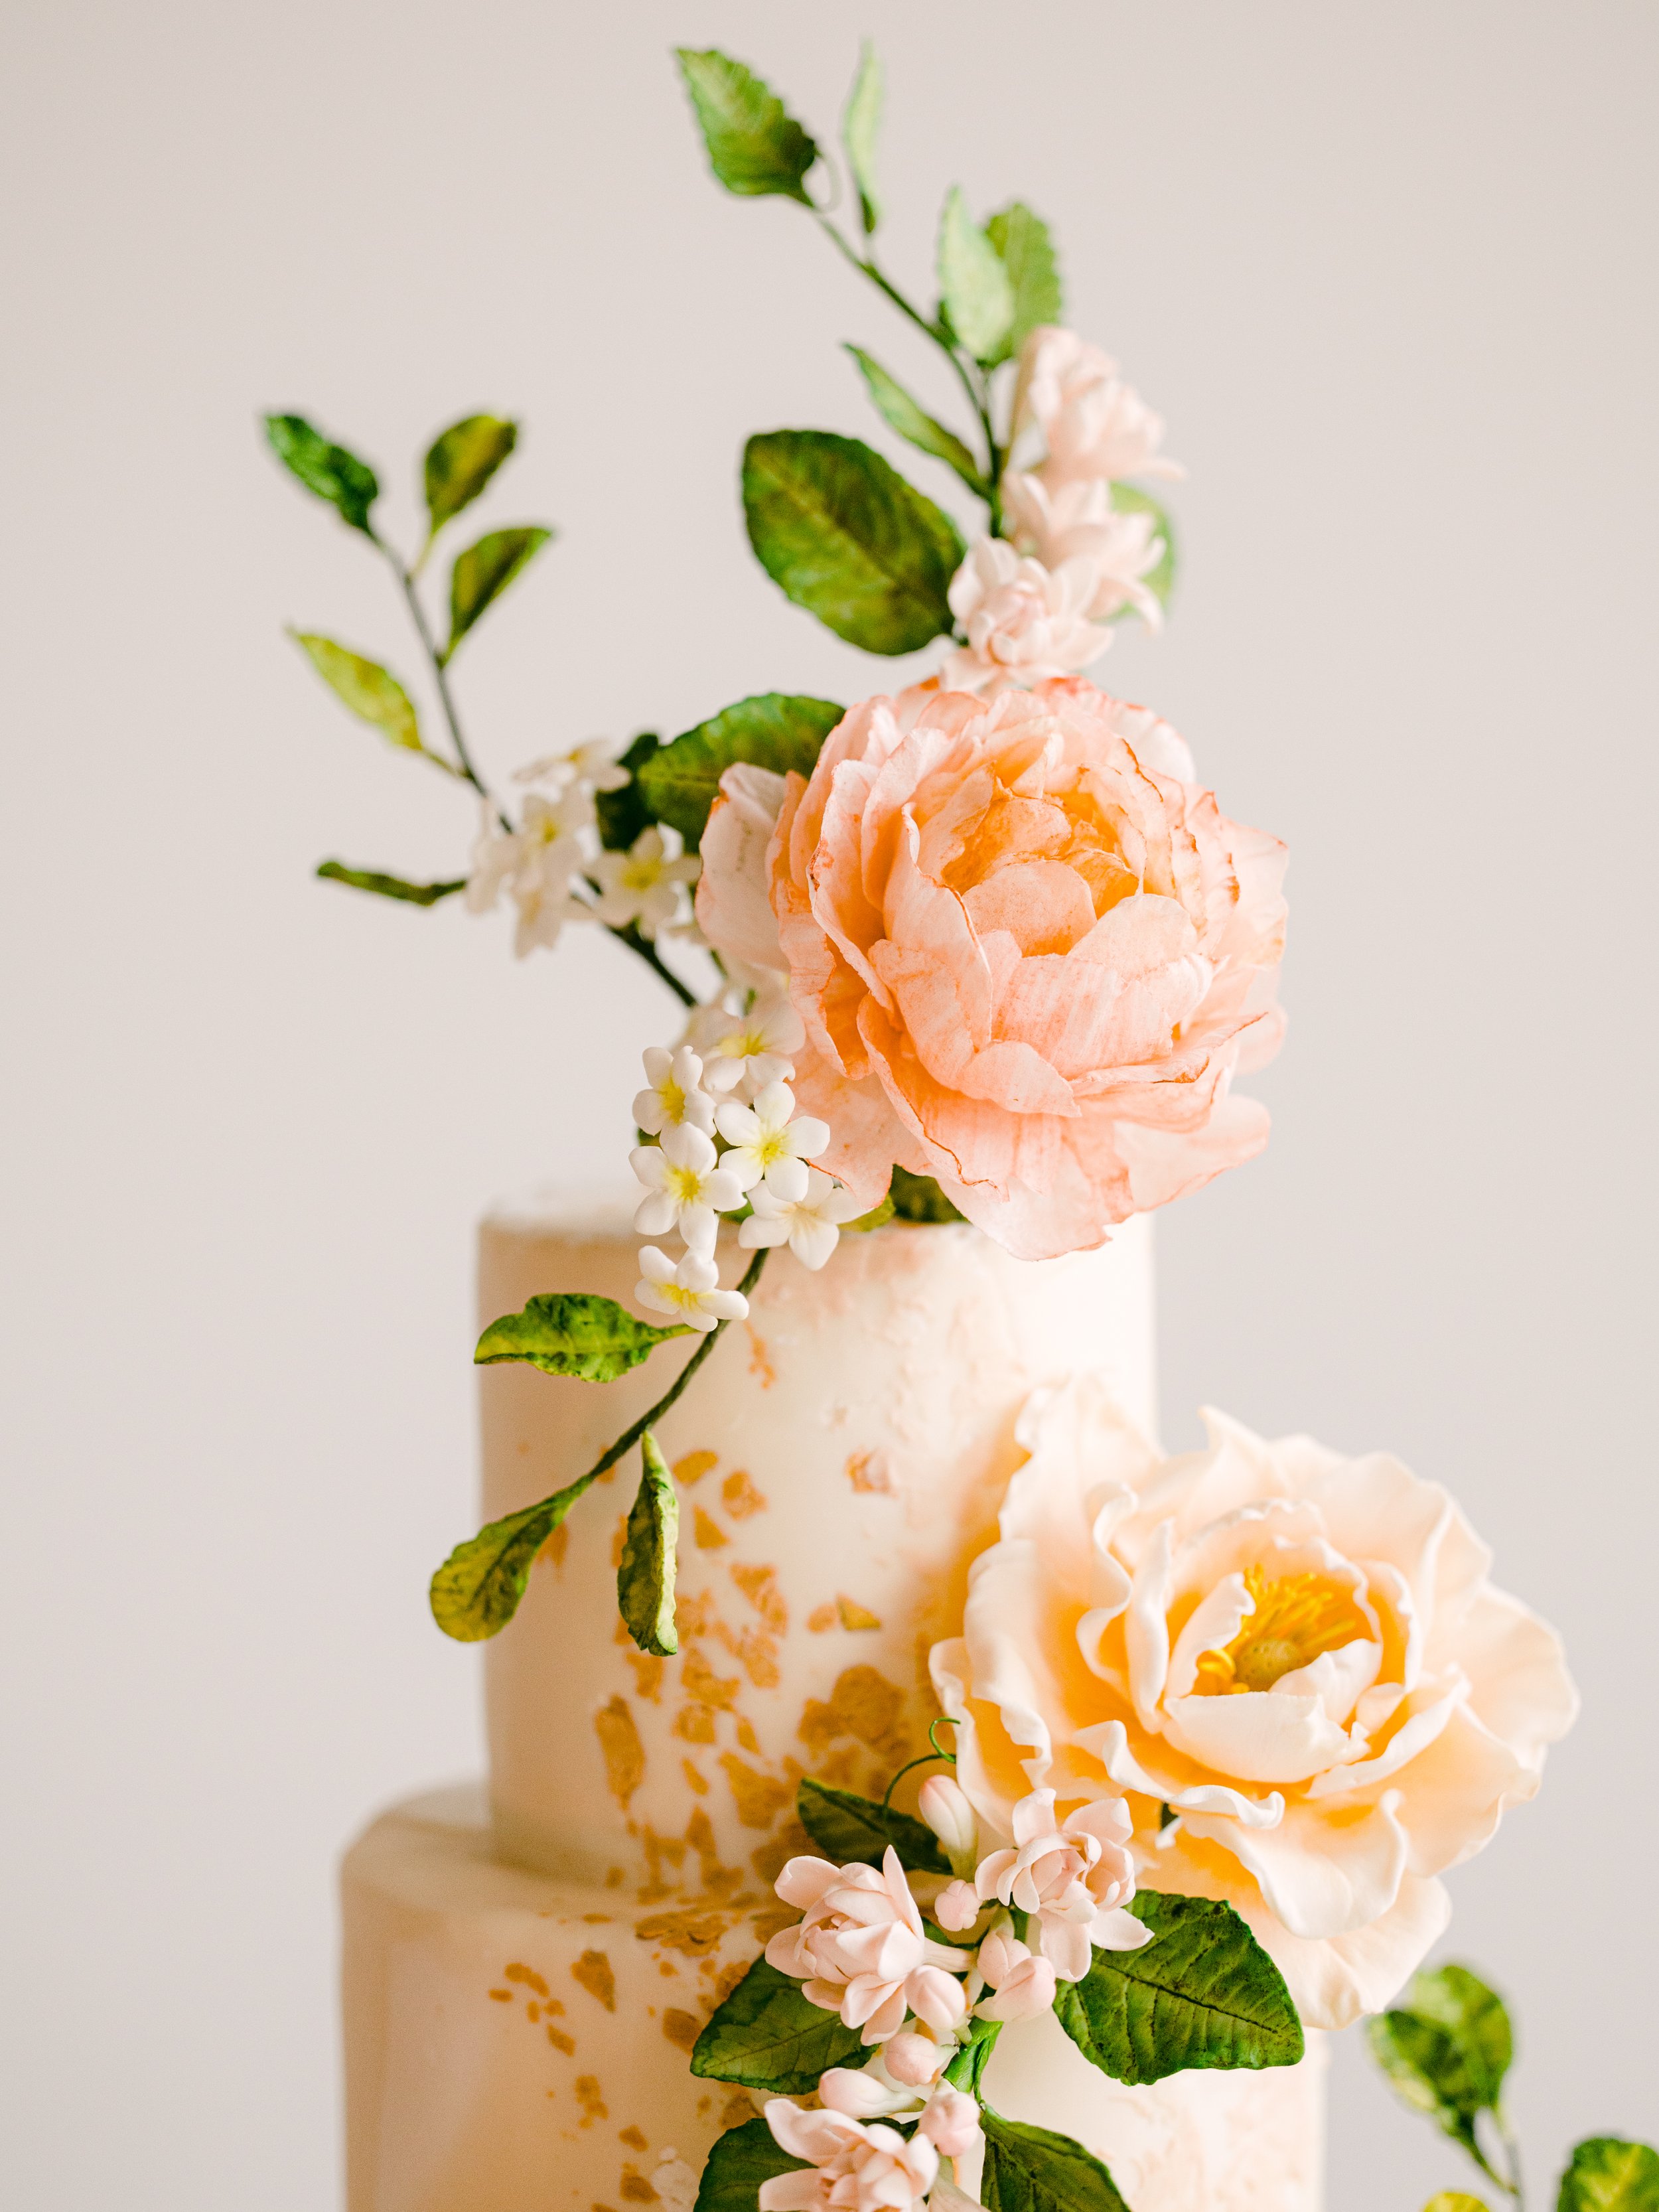 Online Academy: The Art of Wafer Paper Flowers & Cake Design 